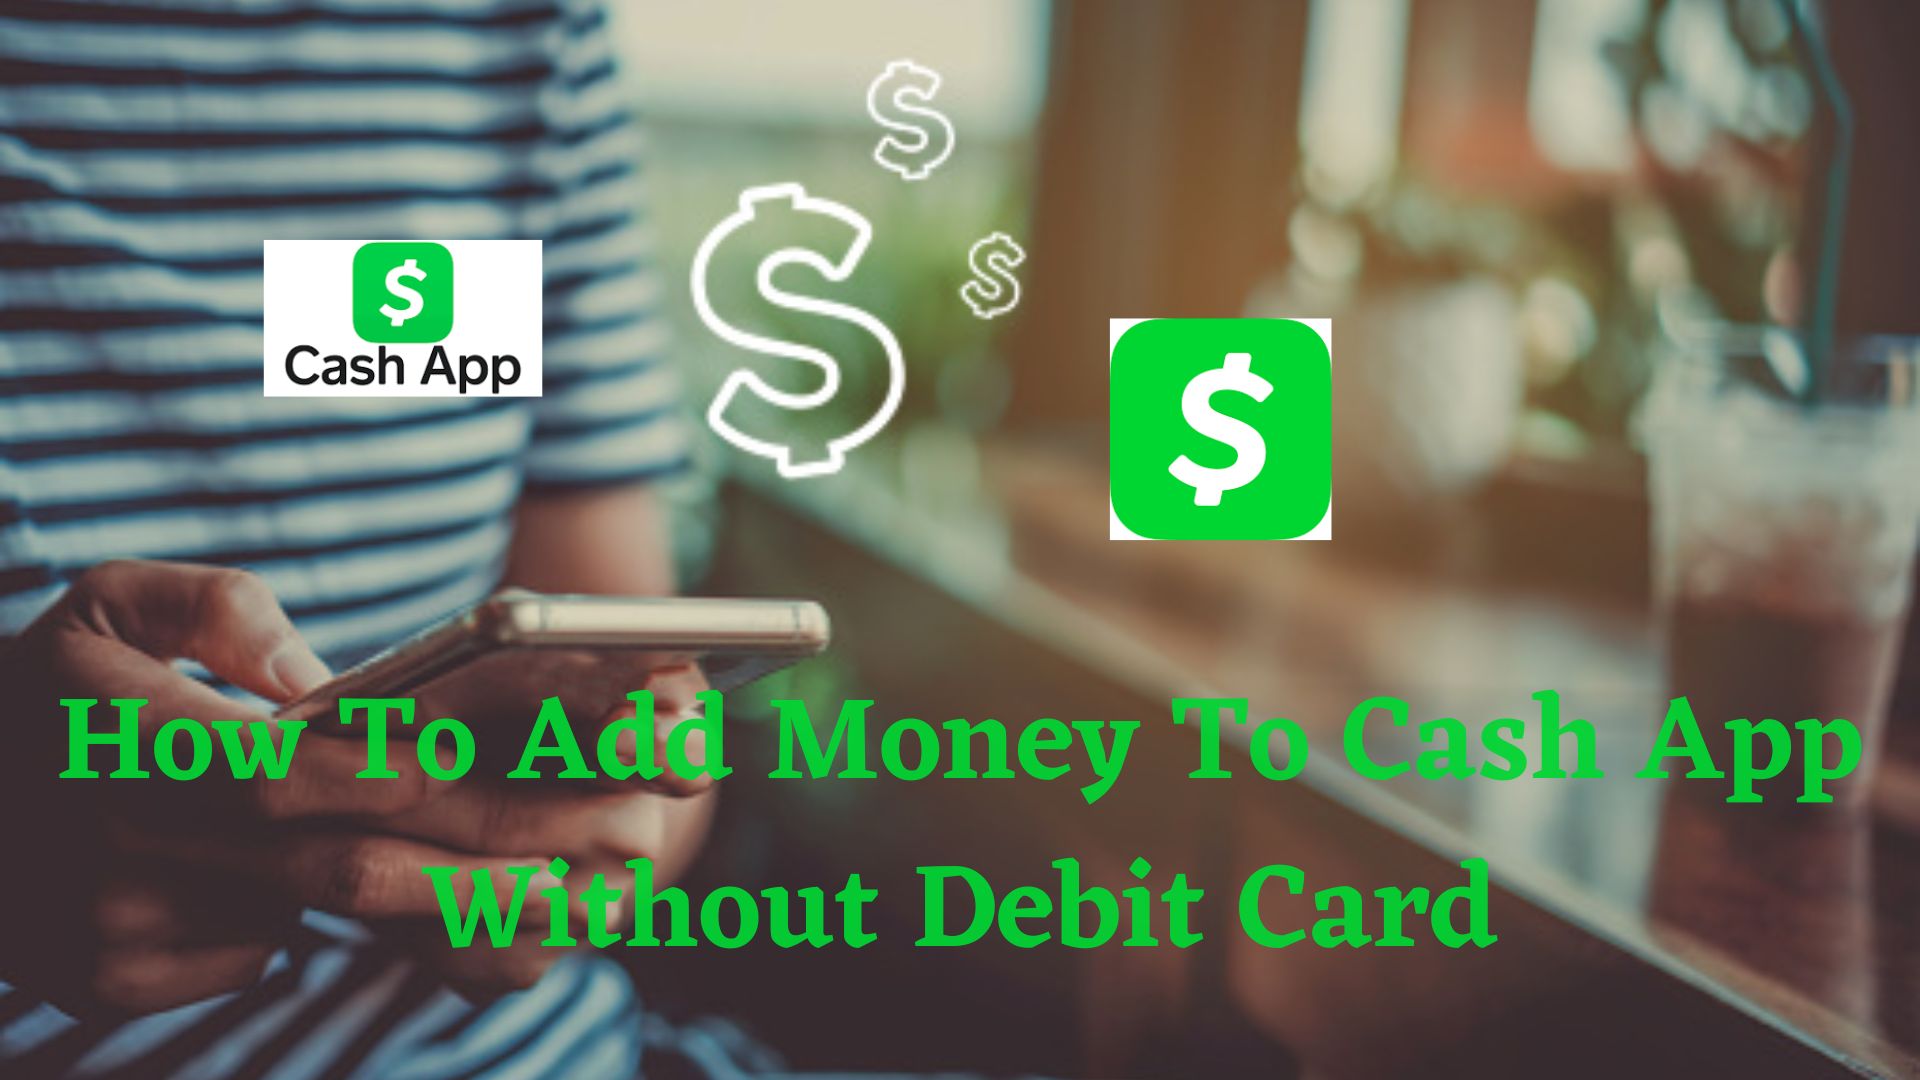 Add Money To Cash App Without Debit Card